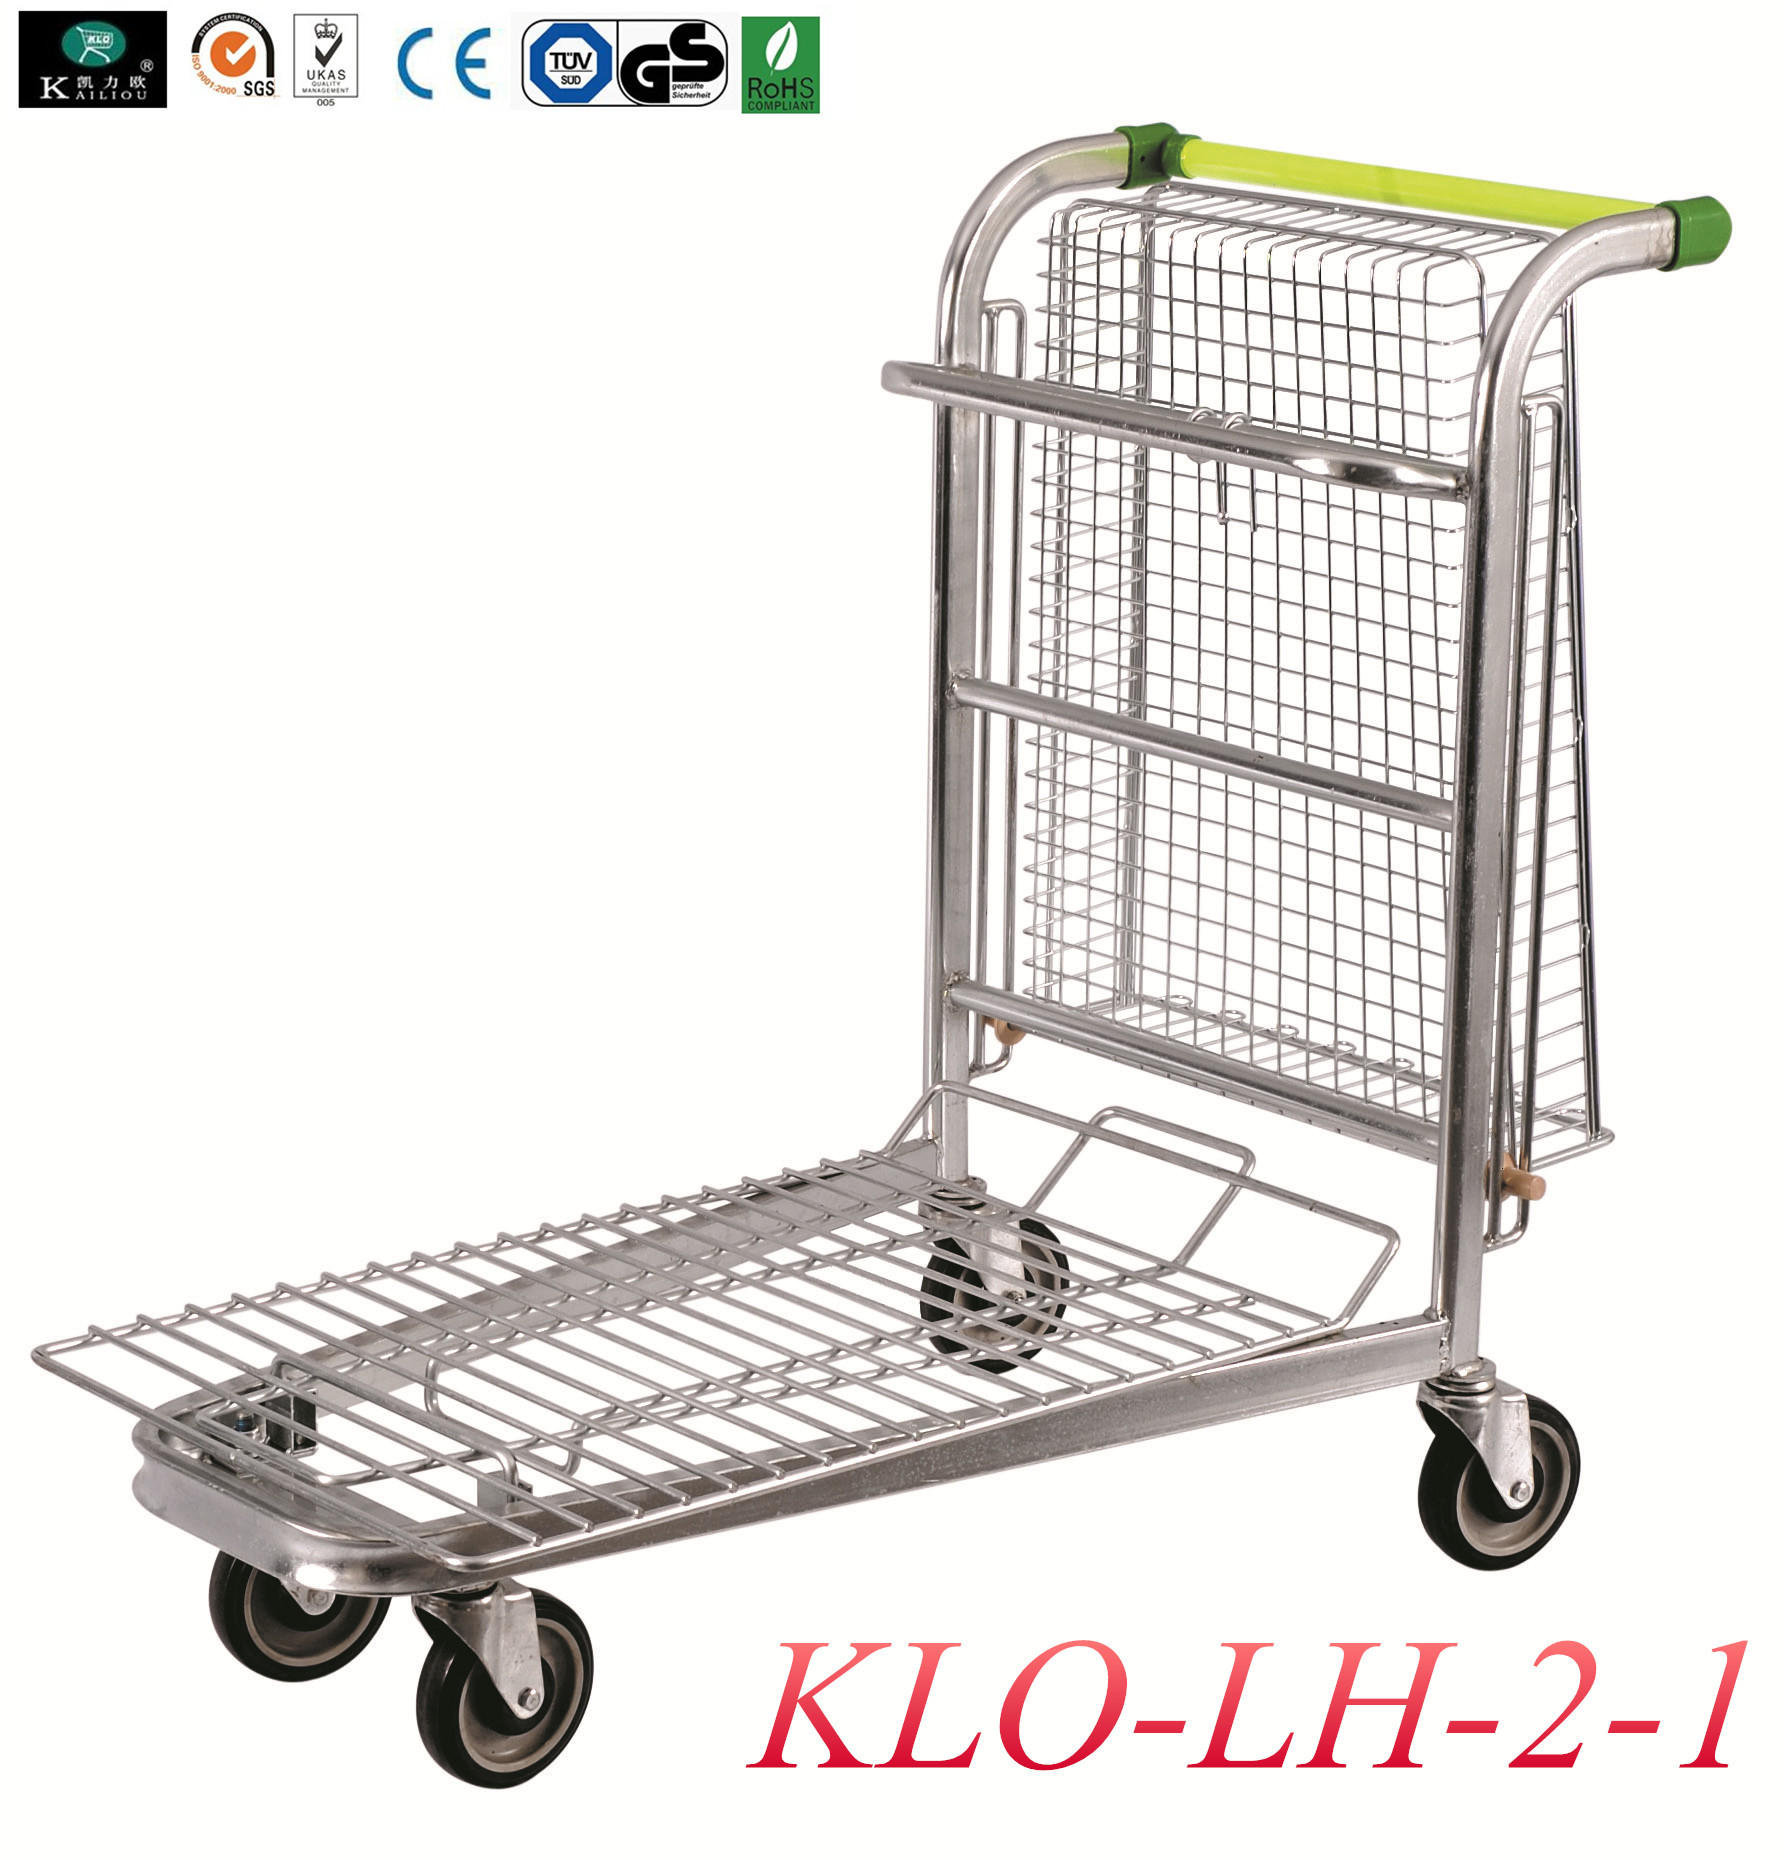 Lightweight 4 Wheel Trolley For Warehouse With Folding Basket Large Load 150KGS